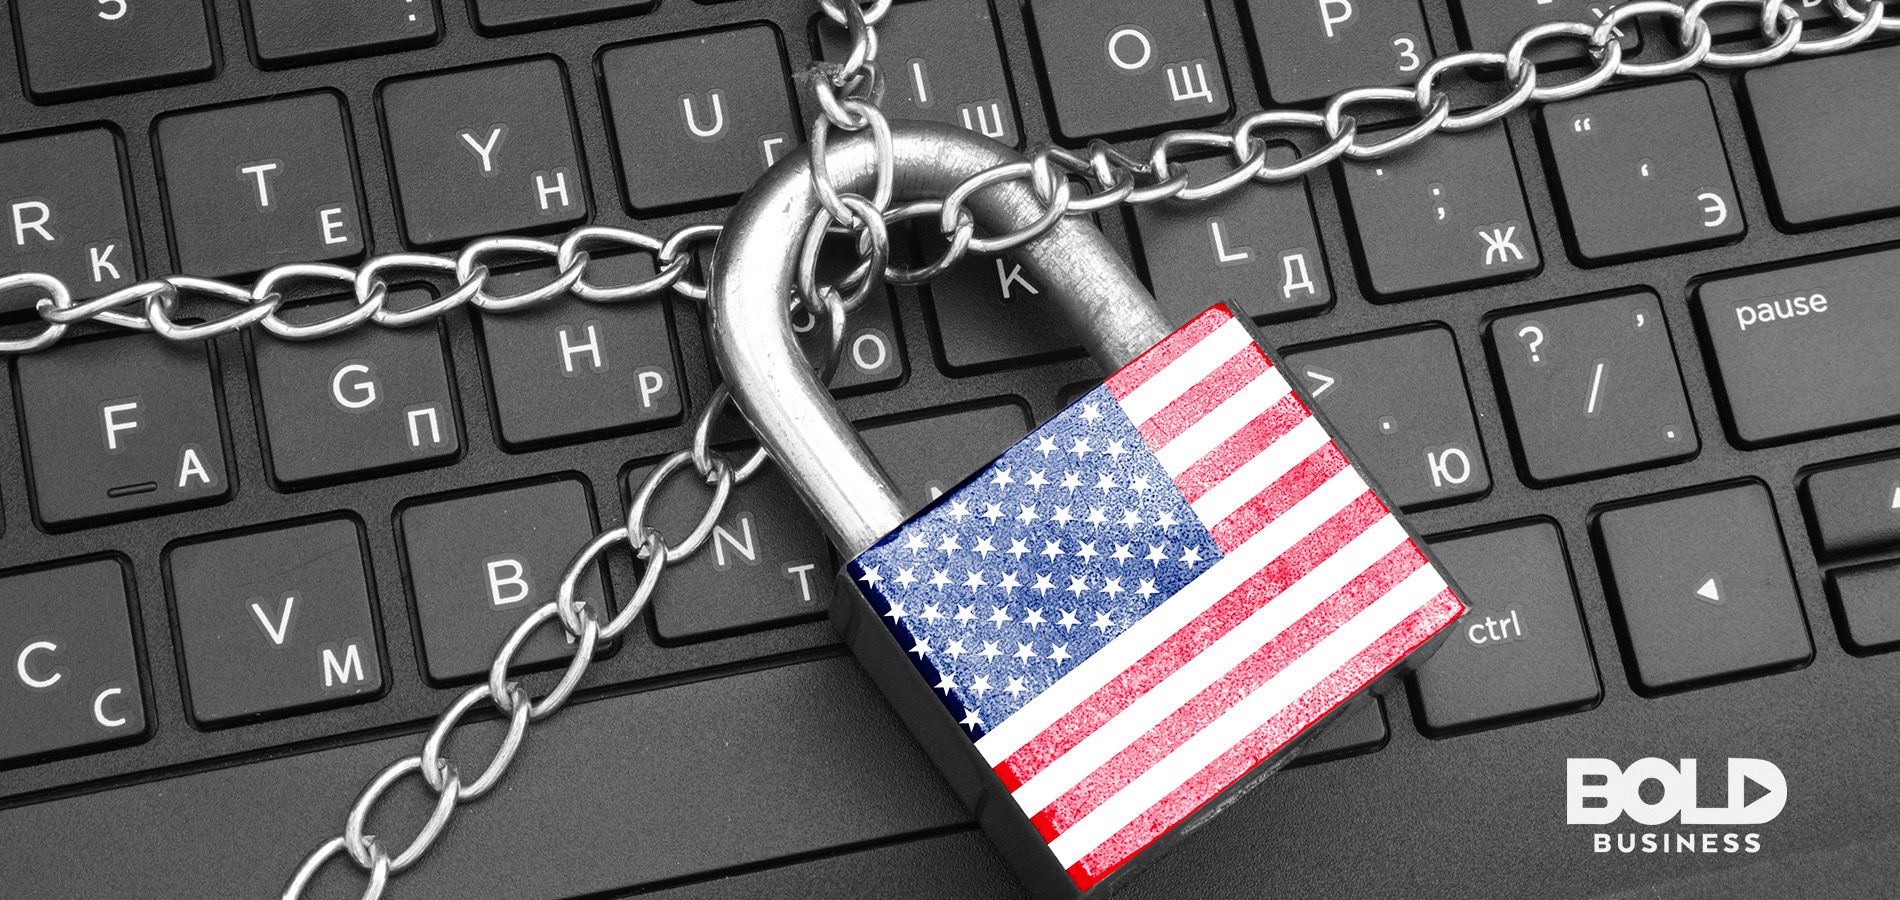 A keyboard locked up American style